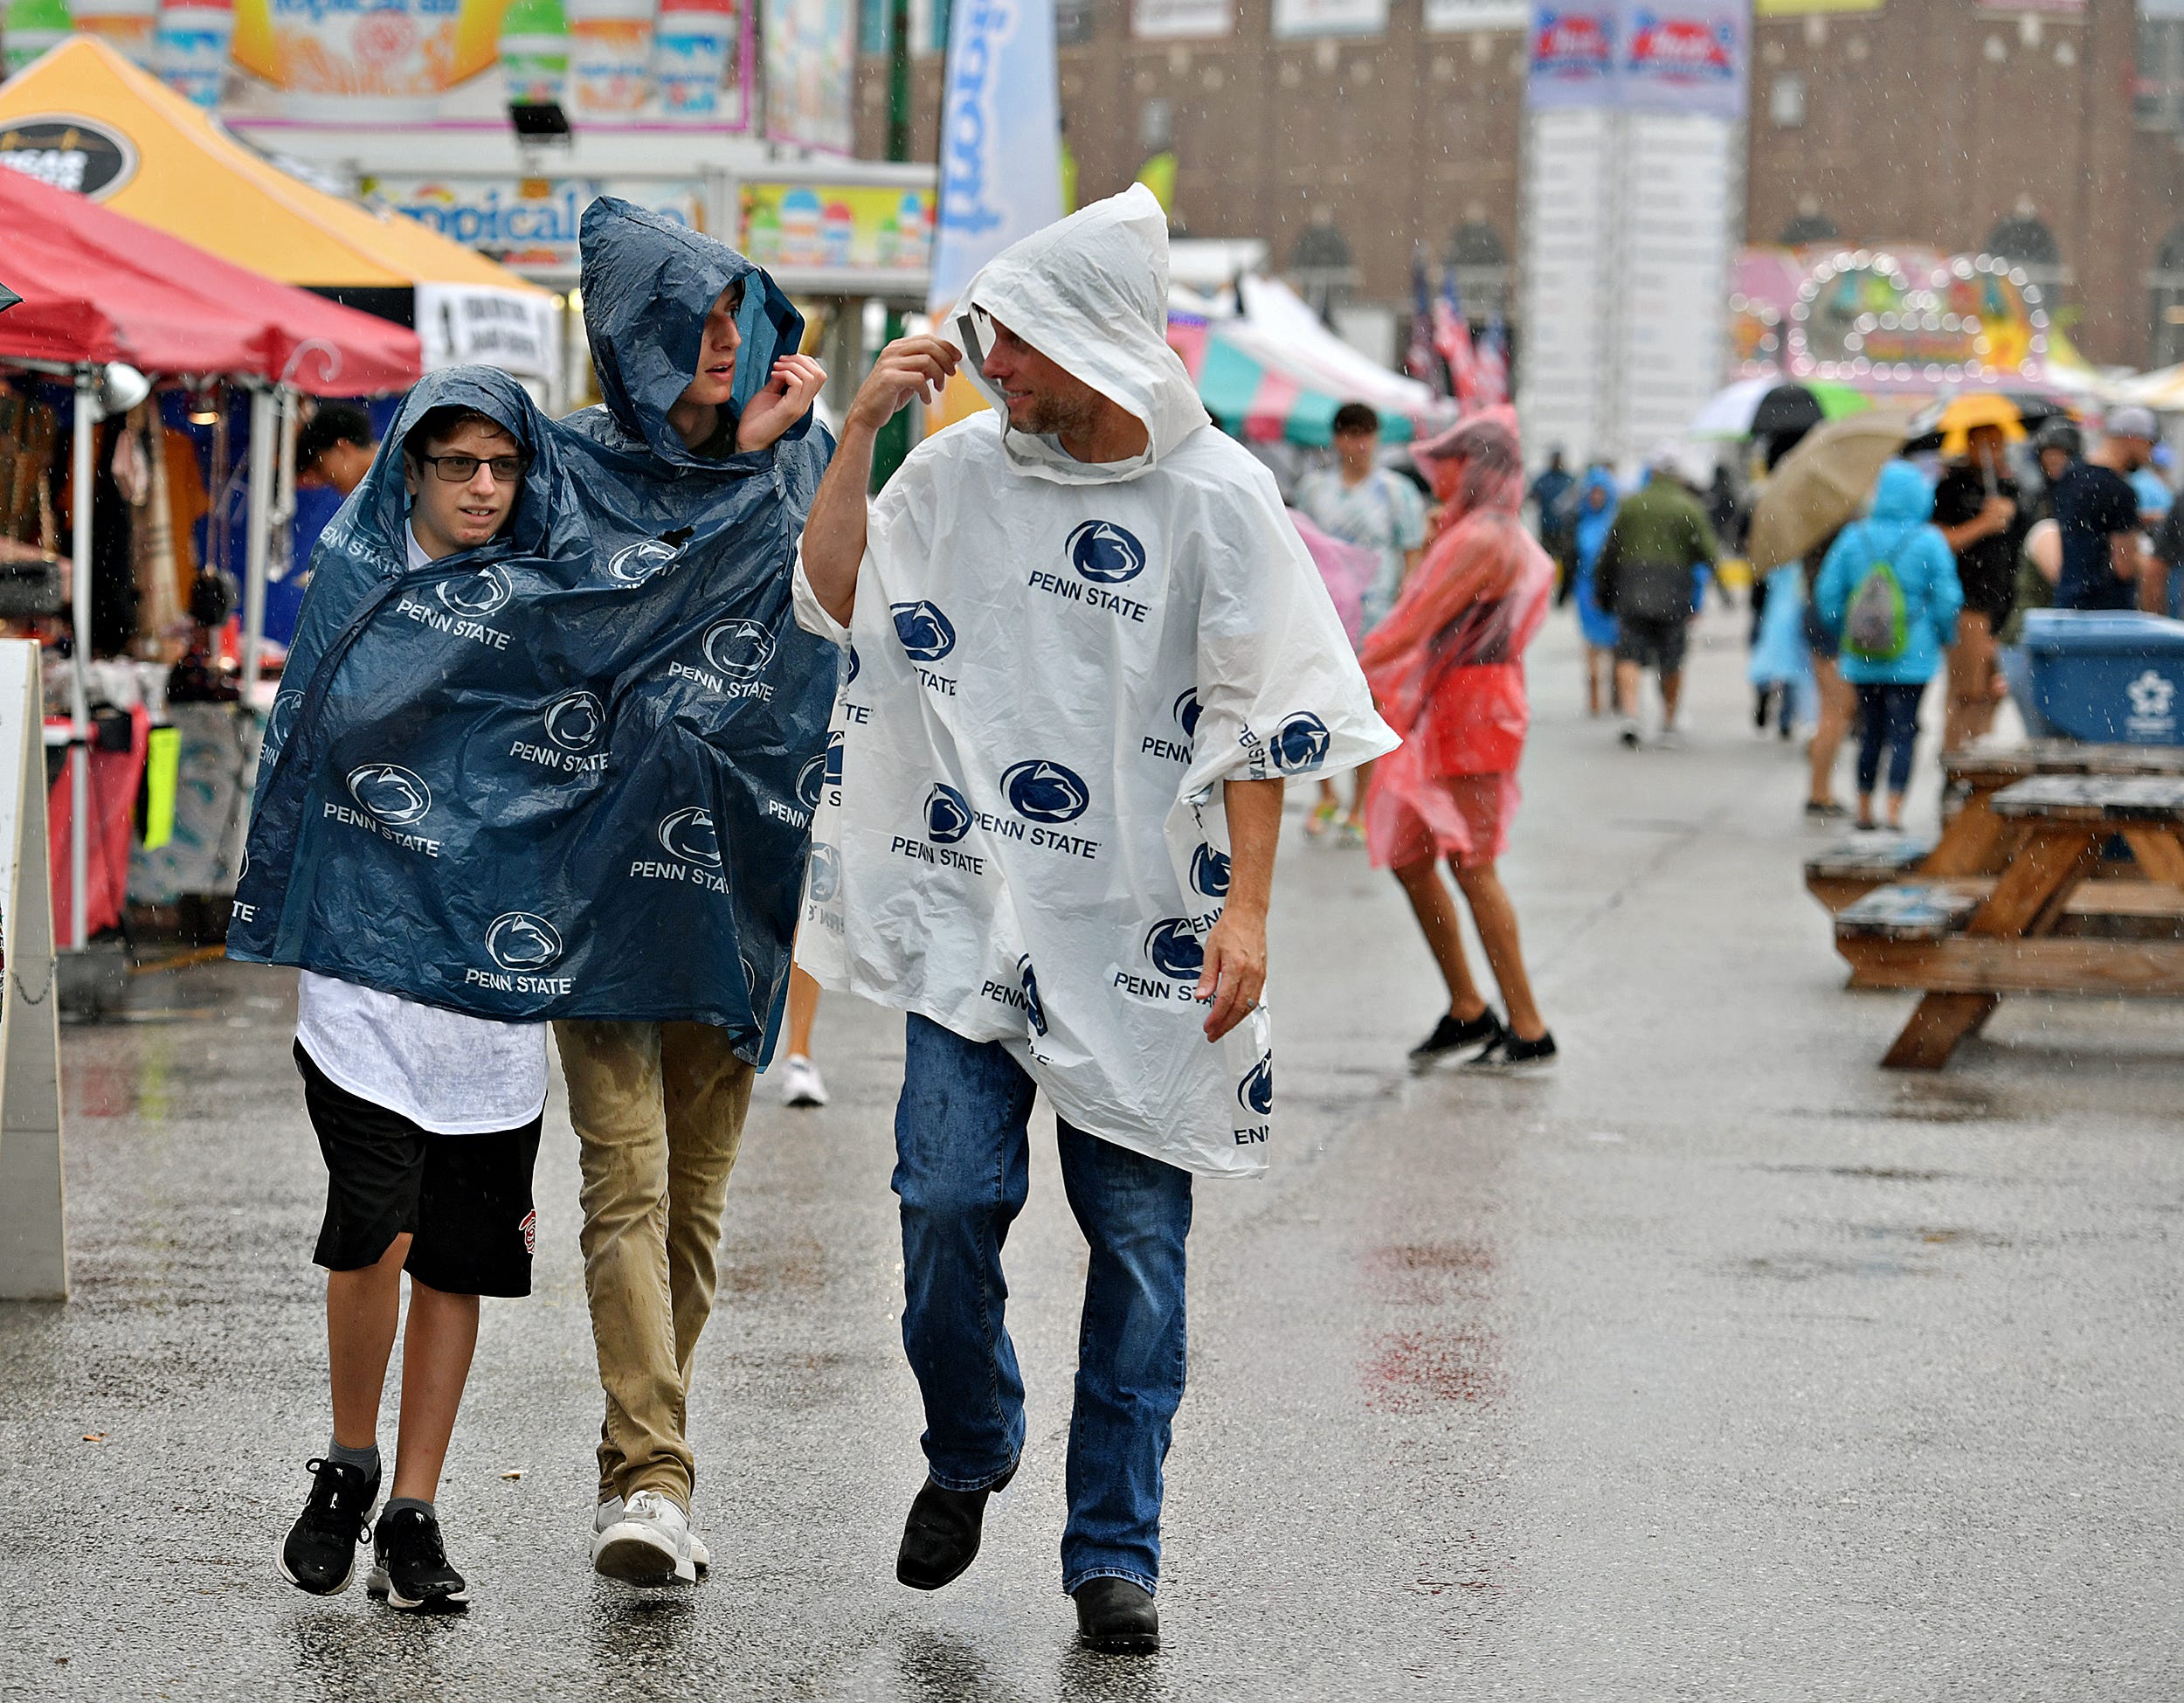 From right, David Fogle, Blaze Fogle, 16, and Brock Fogle, all of Springettsbury Township, brave the rain during the final day of York State Fair in York, Pa., Sunday, July 31, 2022. Dawn J. Sagert/The York Dispatch